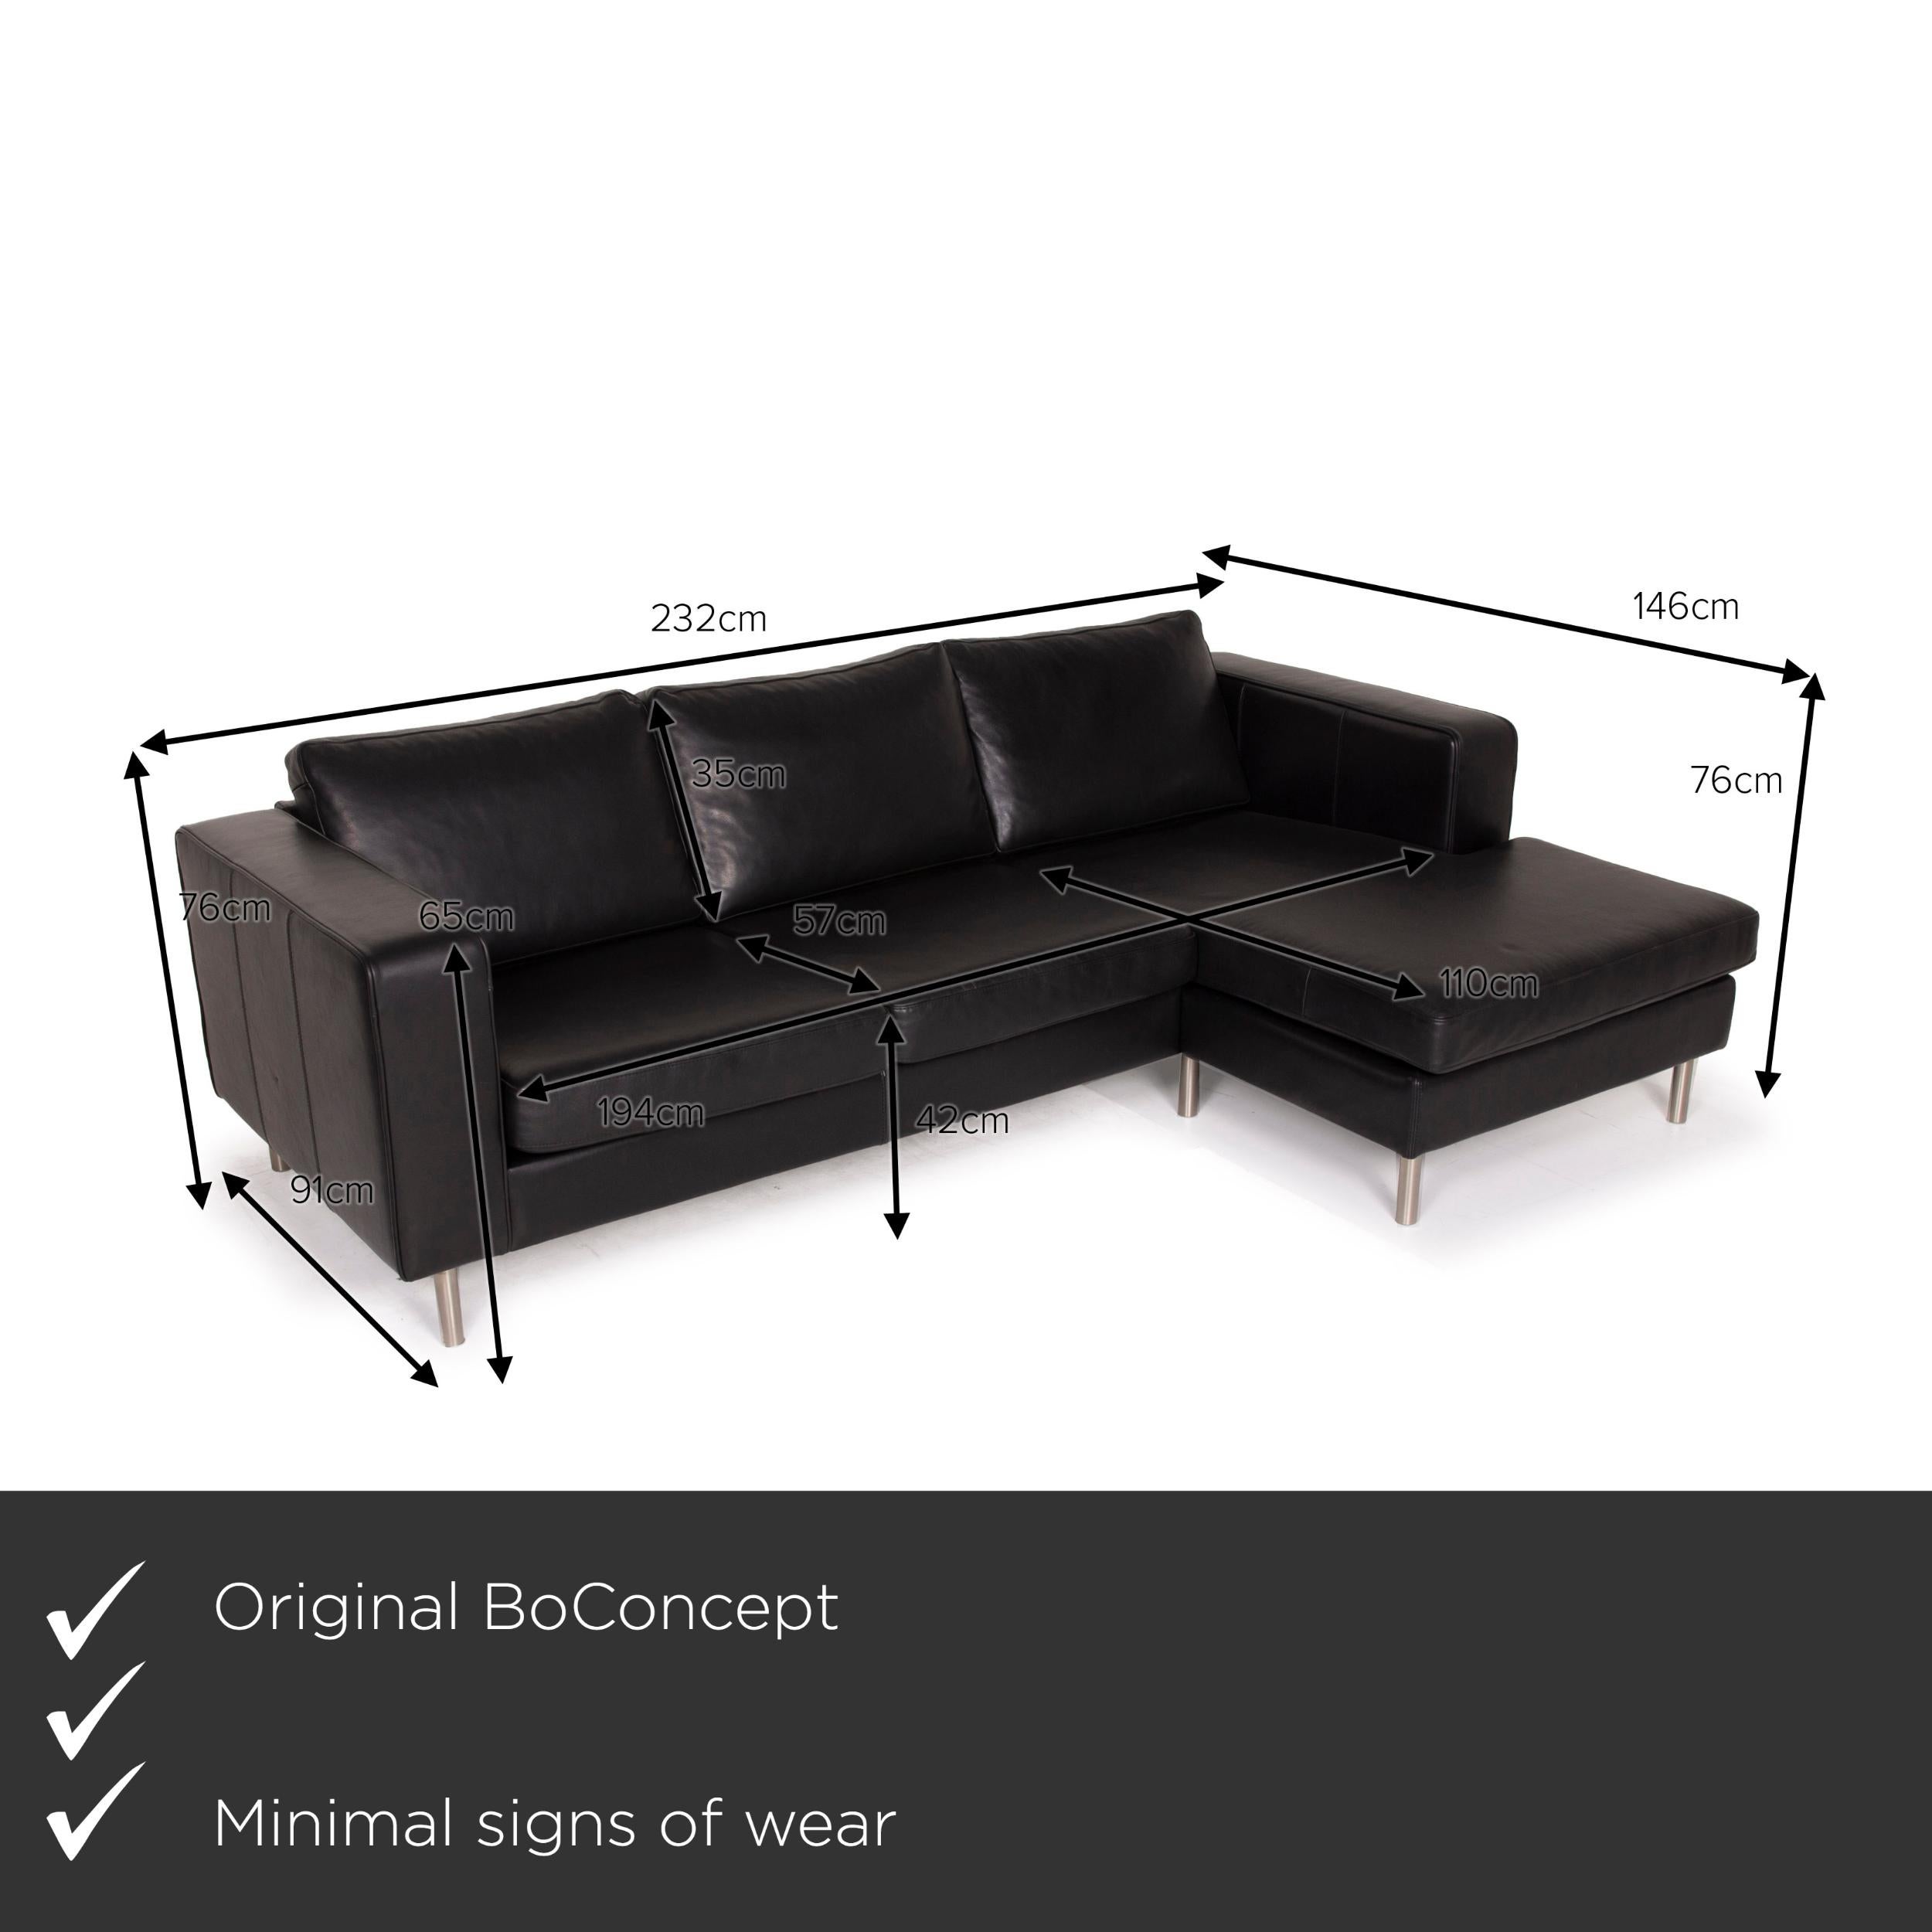 We present to you a BoConcept Indivi leather sof black corner sofa.

 

 Product measurements in centimeters:
 

 depth: 91
 width: 232
 height: 76
 seat height: 42
 rest height: 65
 seat depth: 57
 seat width: 194
 back height: 35.